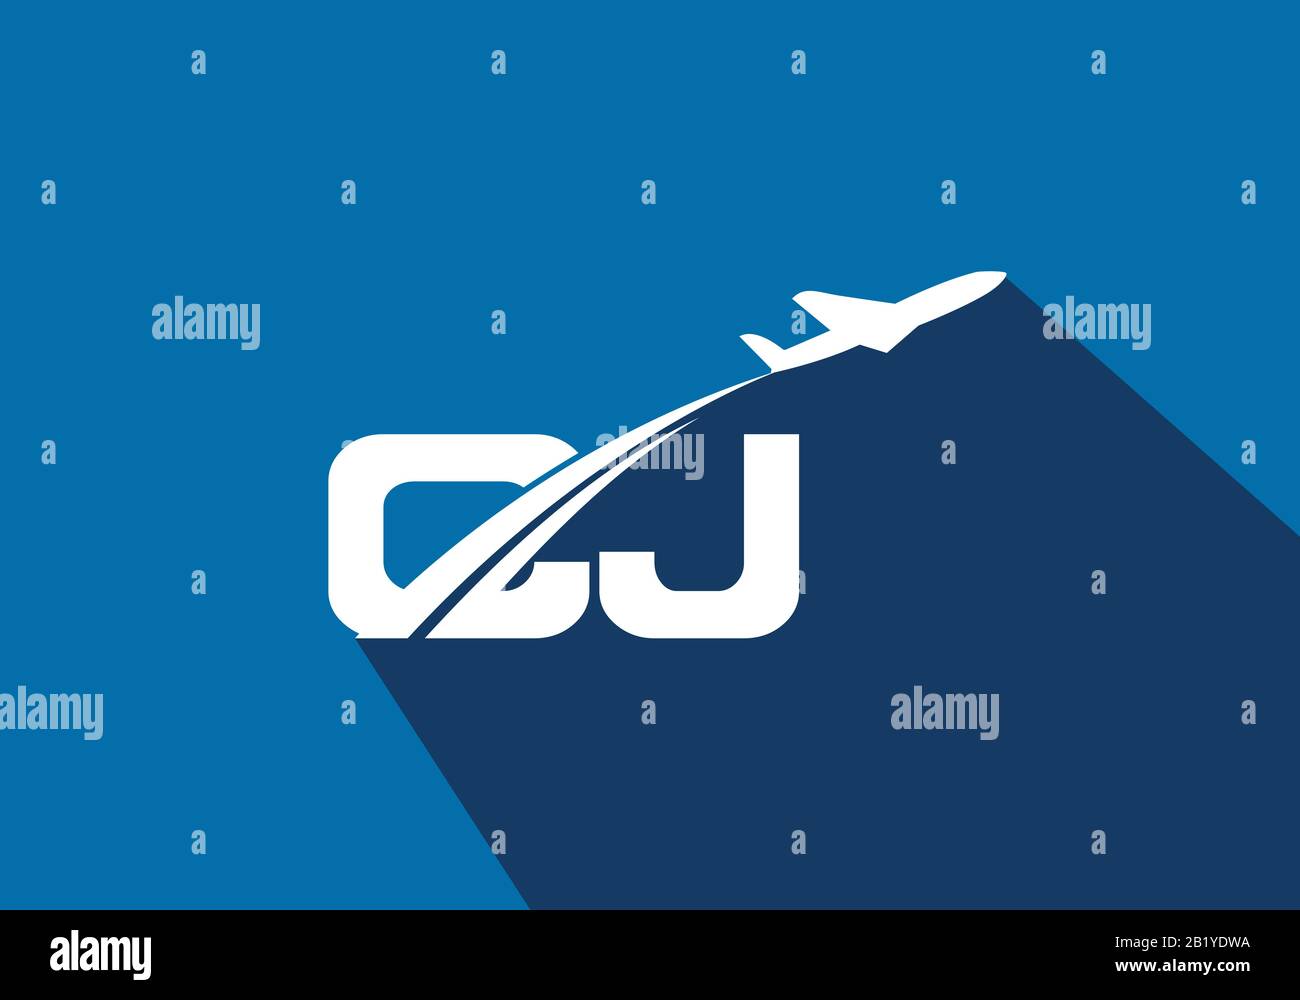 Initial Letter C and J  with Aviation Logo Design, Air, Airline, Airplane and Travel Logo template. Stock Vector